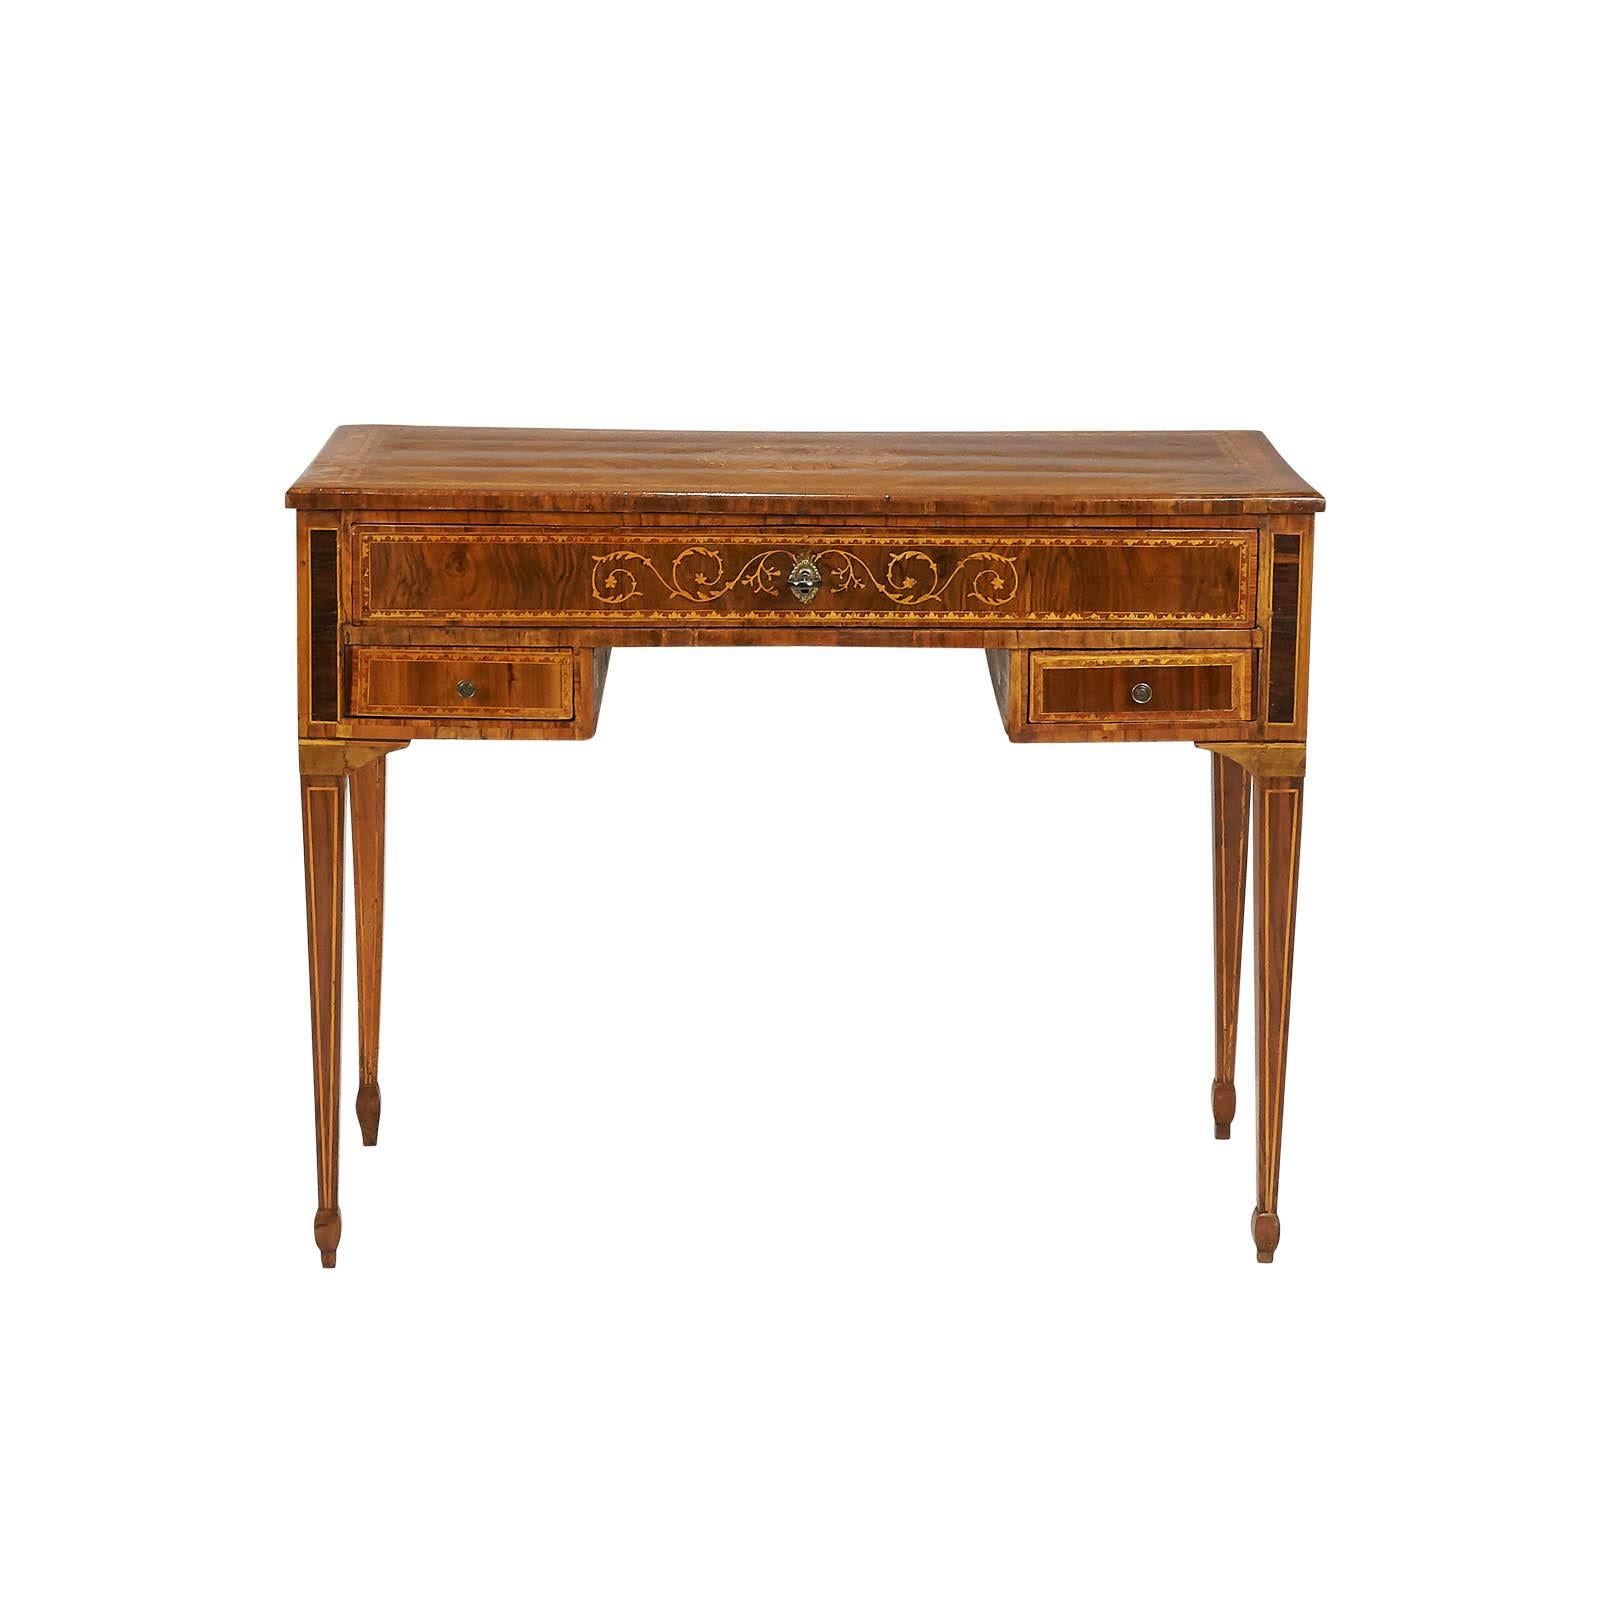 A 19th Century Neoclassical inlaid writing desk or dressing table, Italy circa 1820. The desk has one long drawer over 2 short drawers, the top drawer has been relined, recently polished.

